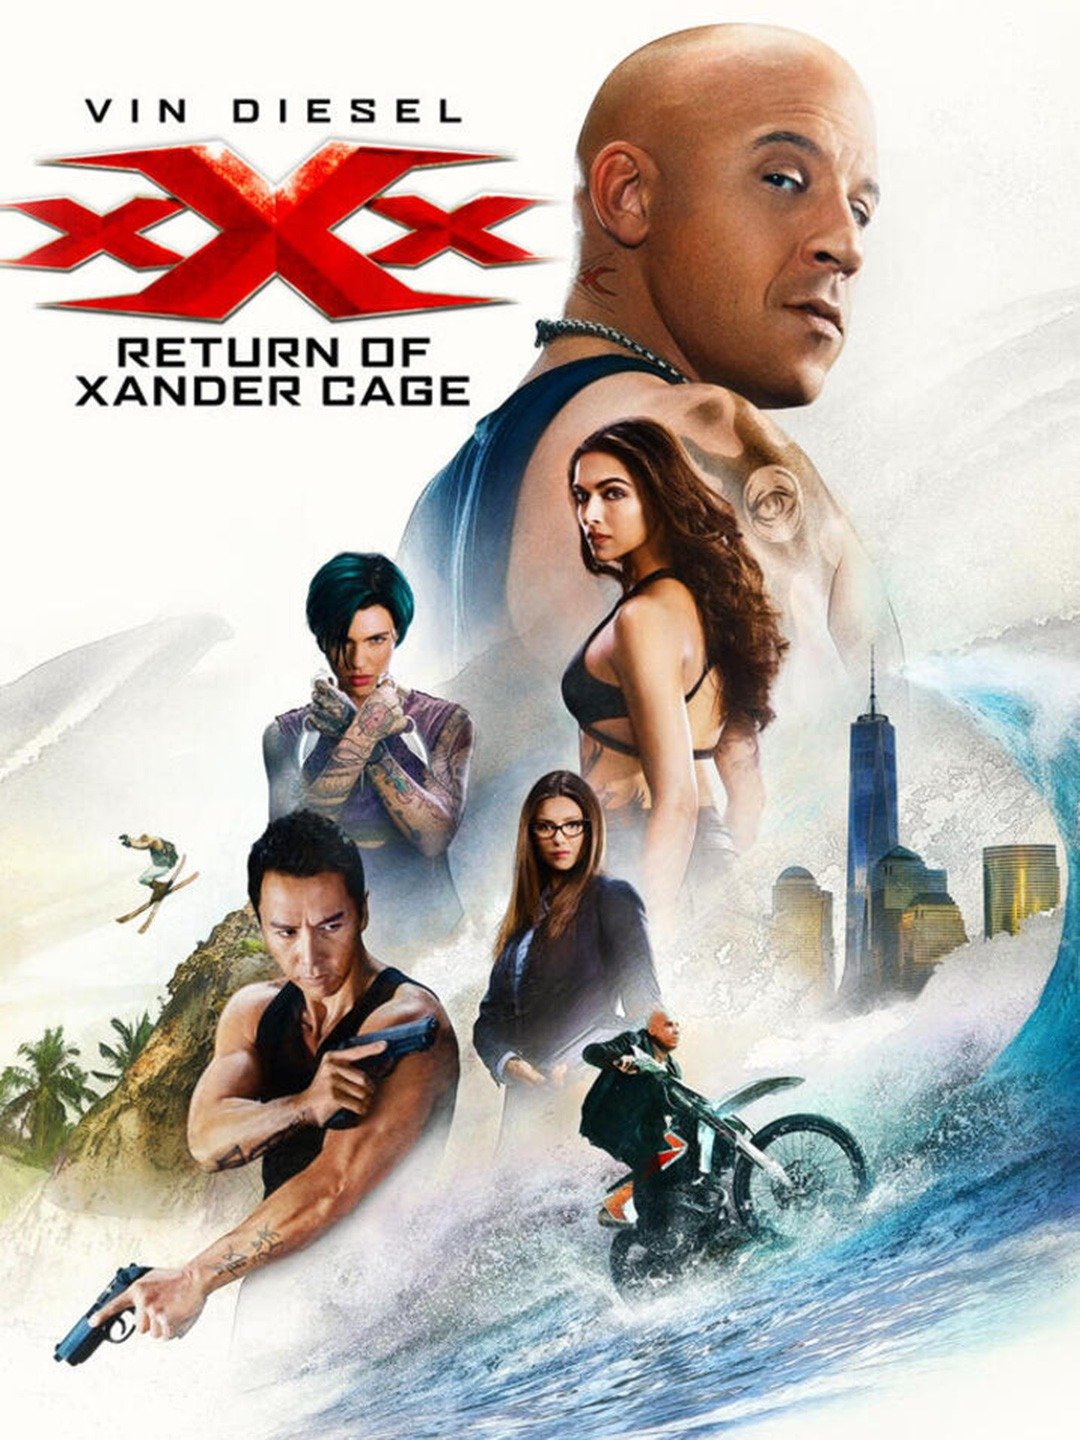 Hd Hq Mabael Pon Vidio - xXx: Return of Xander Cage - Rotten Tomatoes